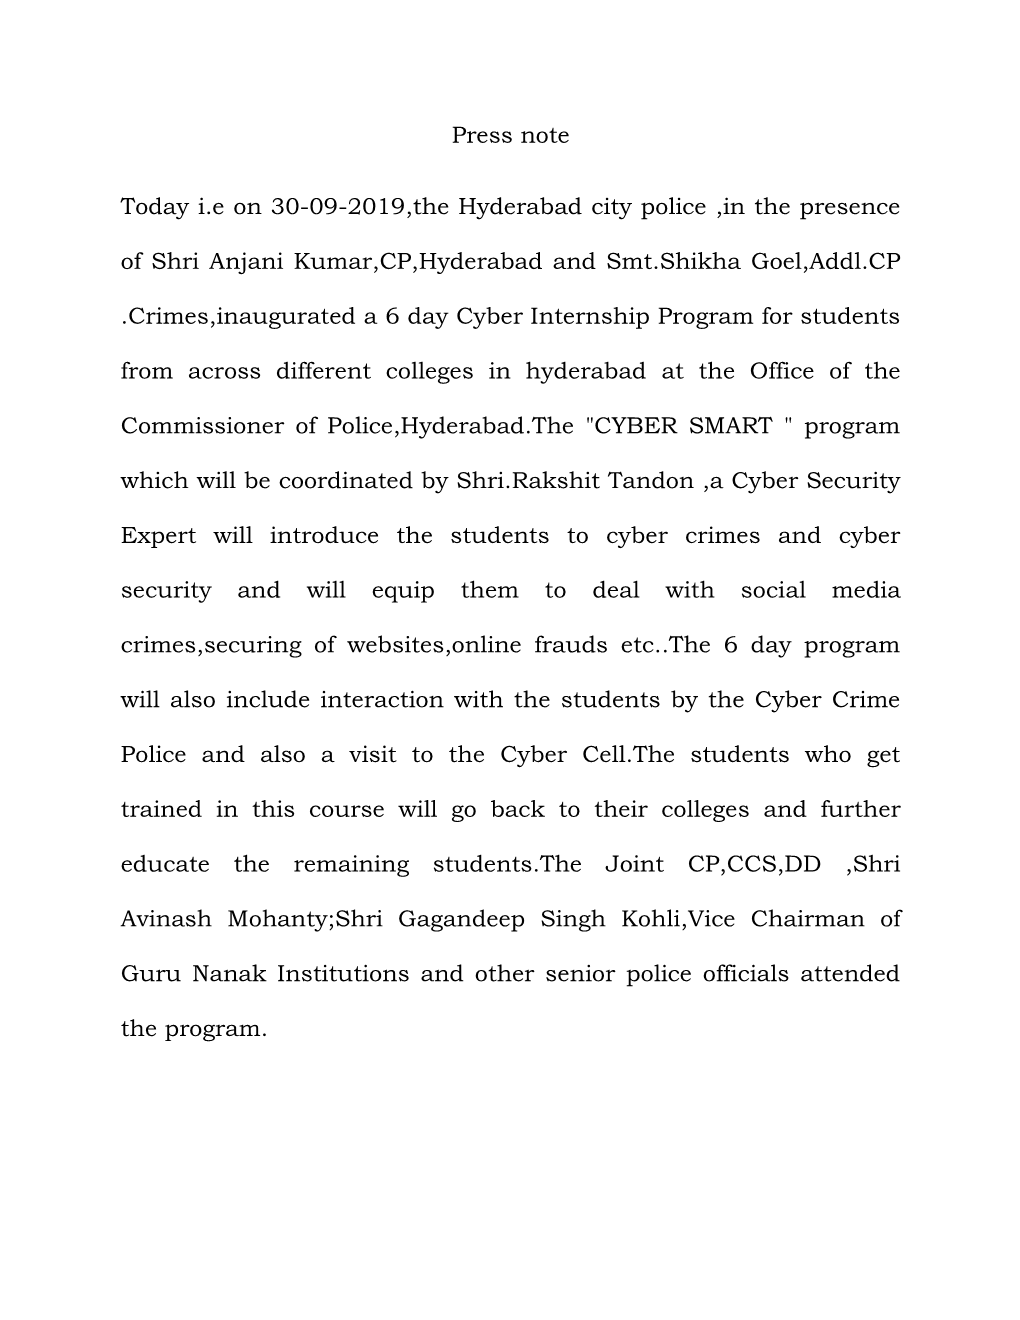 Press Note Today I.E on 30-09-2019,The Hyderabad City